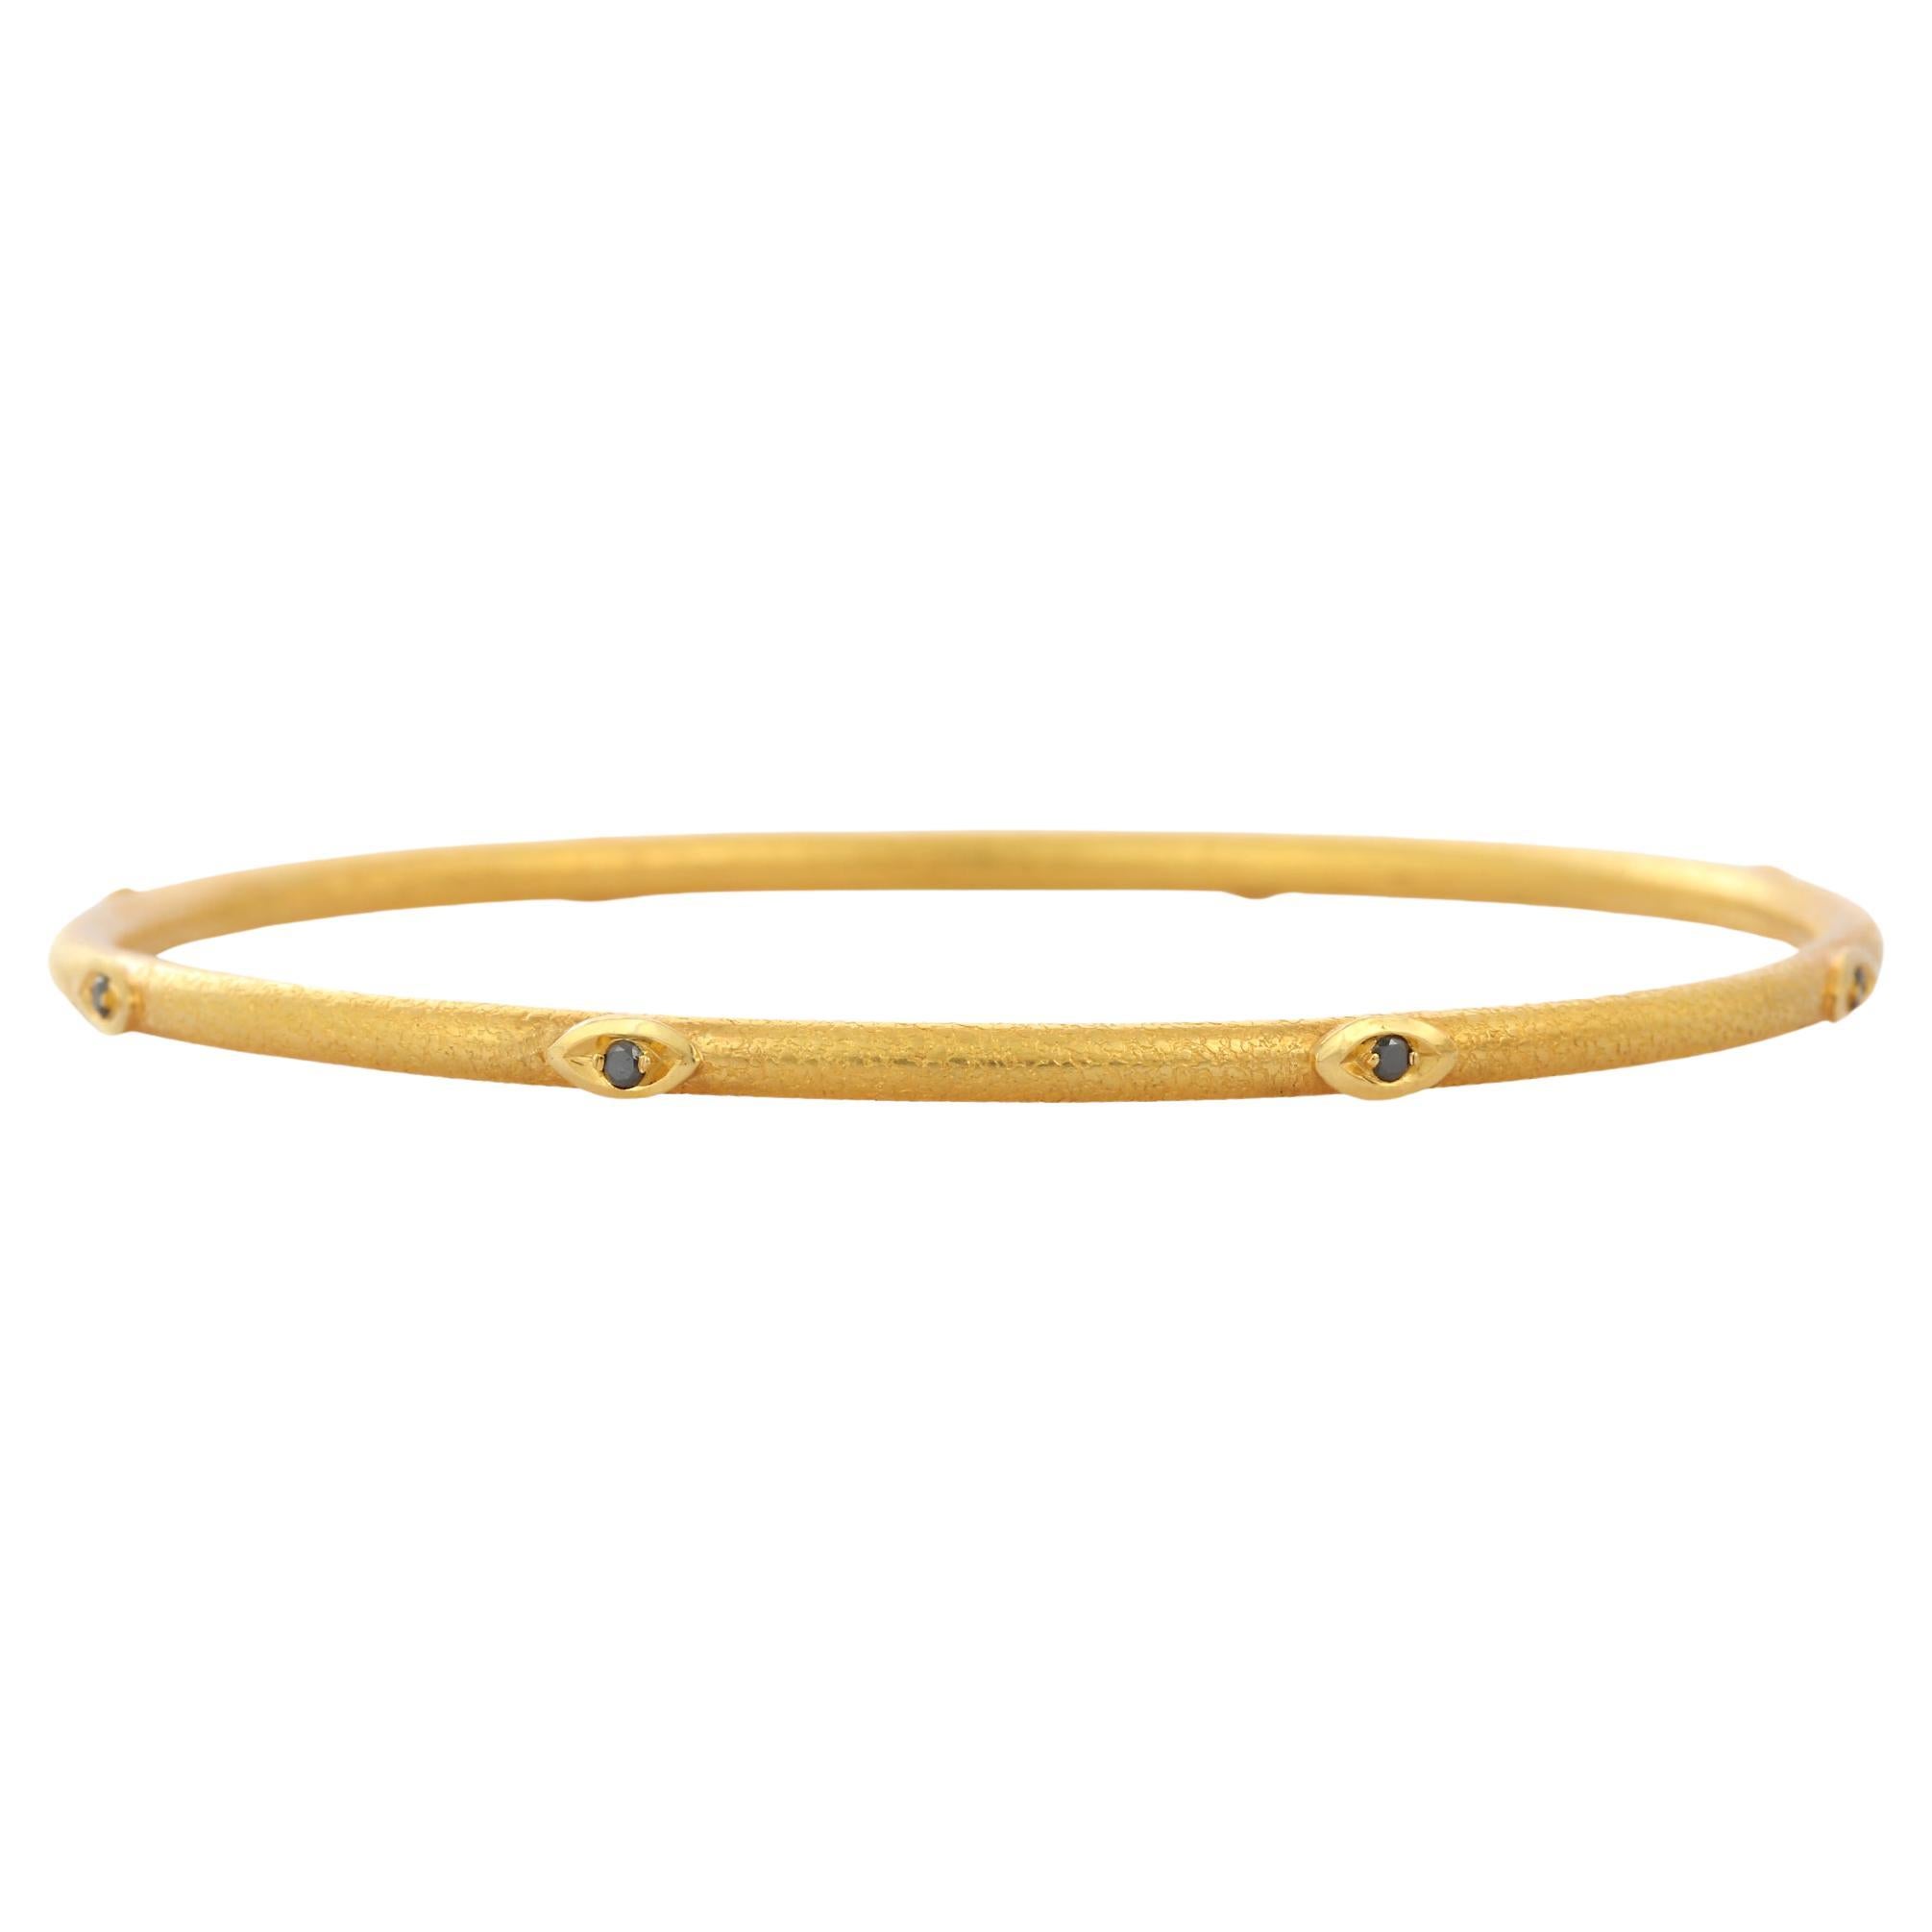  Solid 14k Yellow Gold Wide Oval Bangle Bracelet for Women -  Flat Plain Gold 6 mm Heavy Bangle - Length 6 to 8 Inches available -  Handmade in USA : Handmade Products